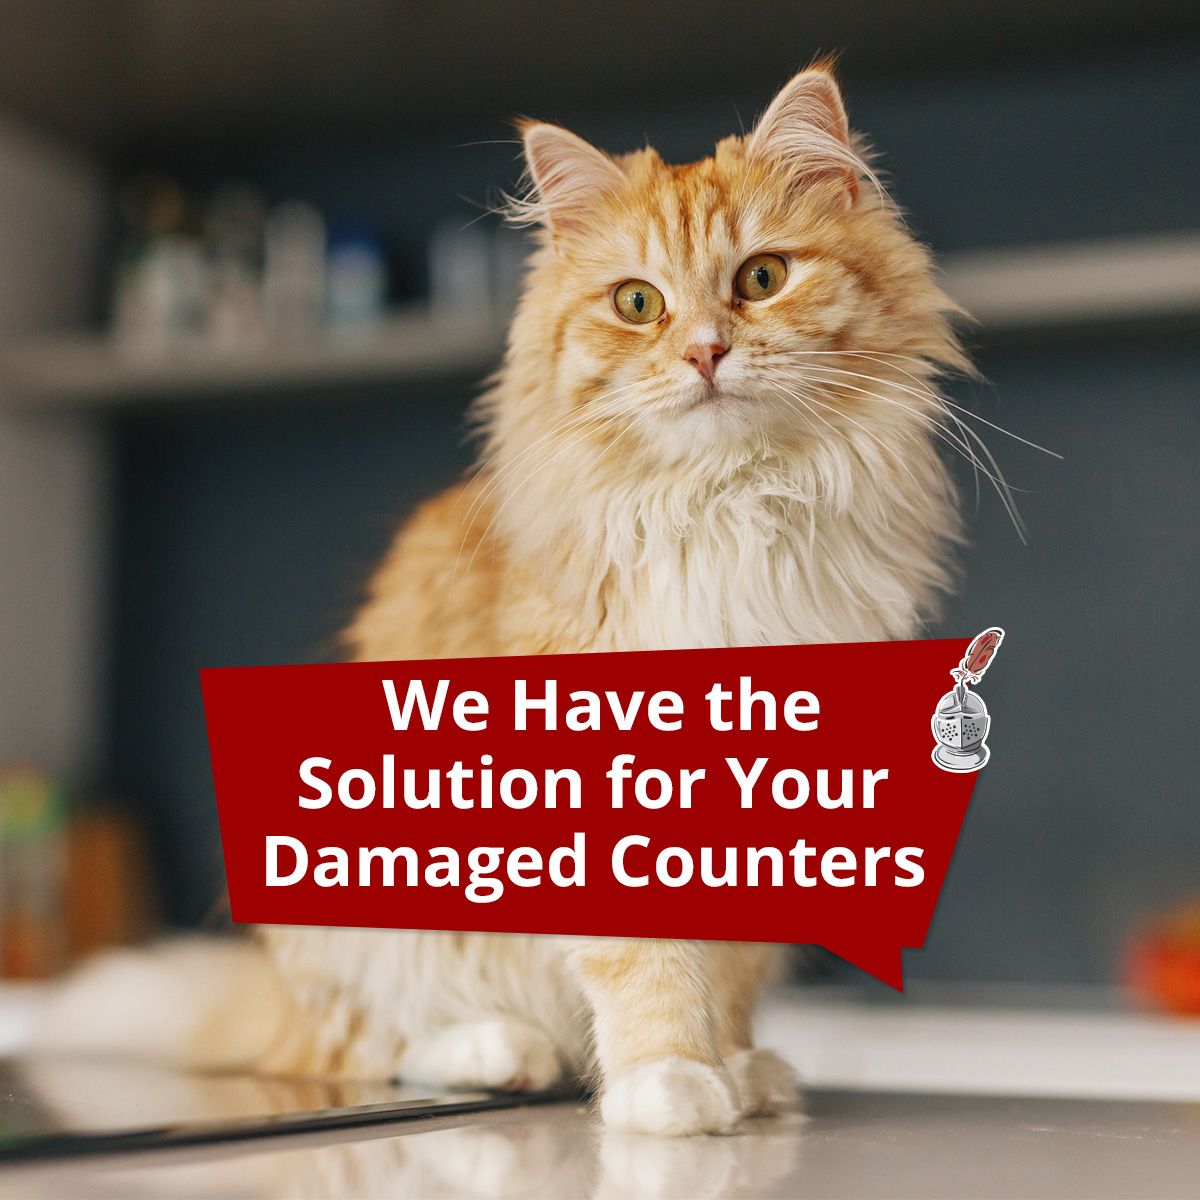 We Have the Solution for Your Damaged Counters